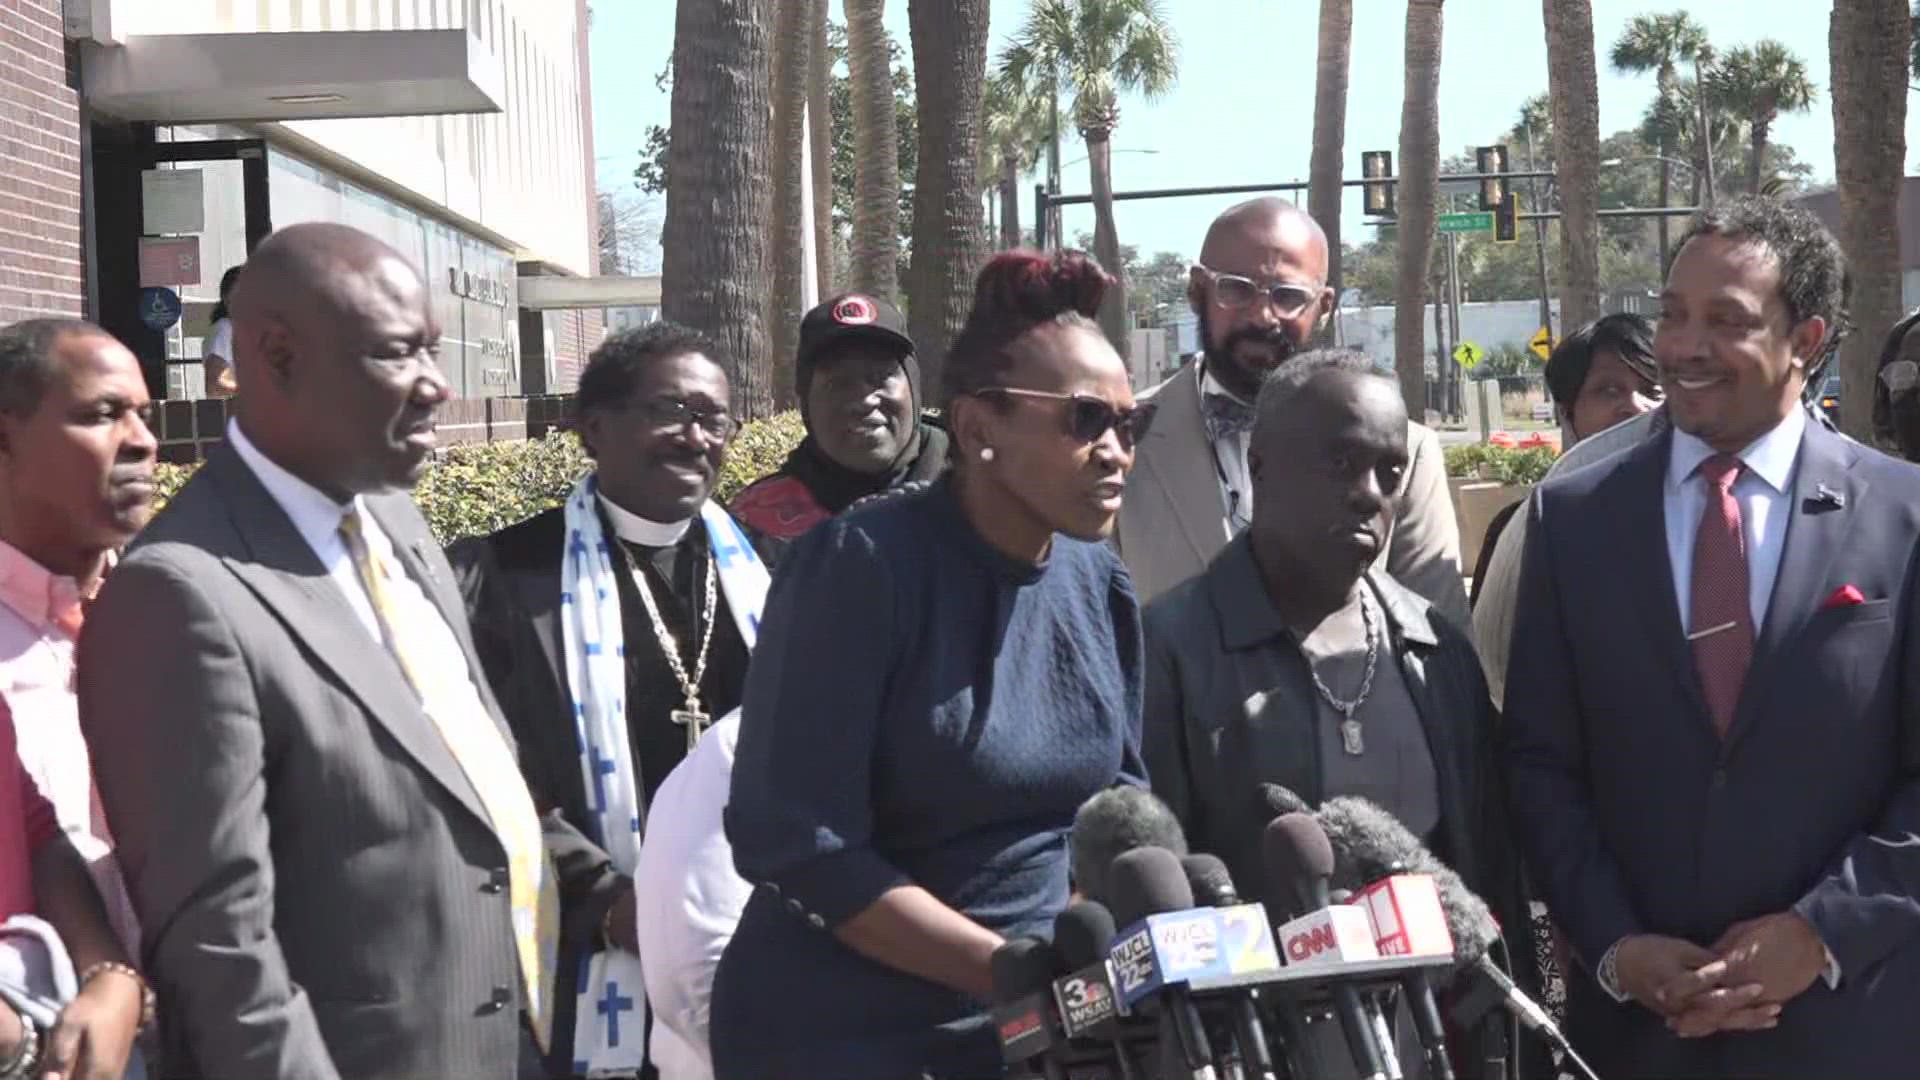 Wanda Cooper-Jones said she wanted to keep her remarks simple after her son's killers were convicted of federal hate crimes. "Today is Super Tuesday."